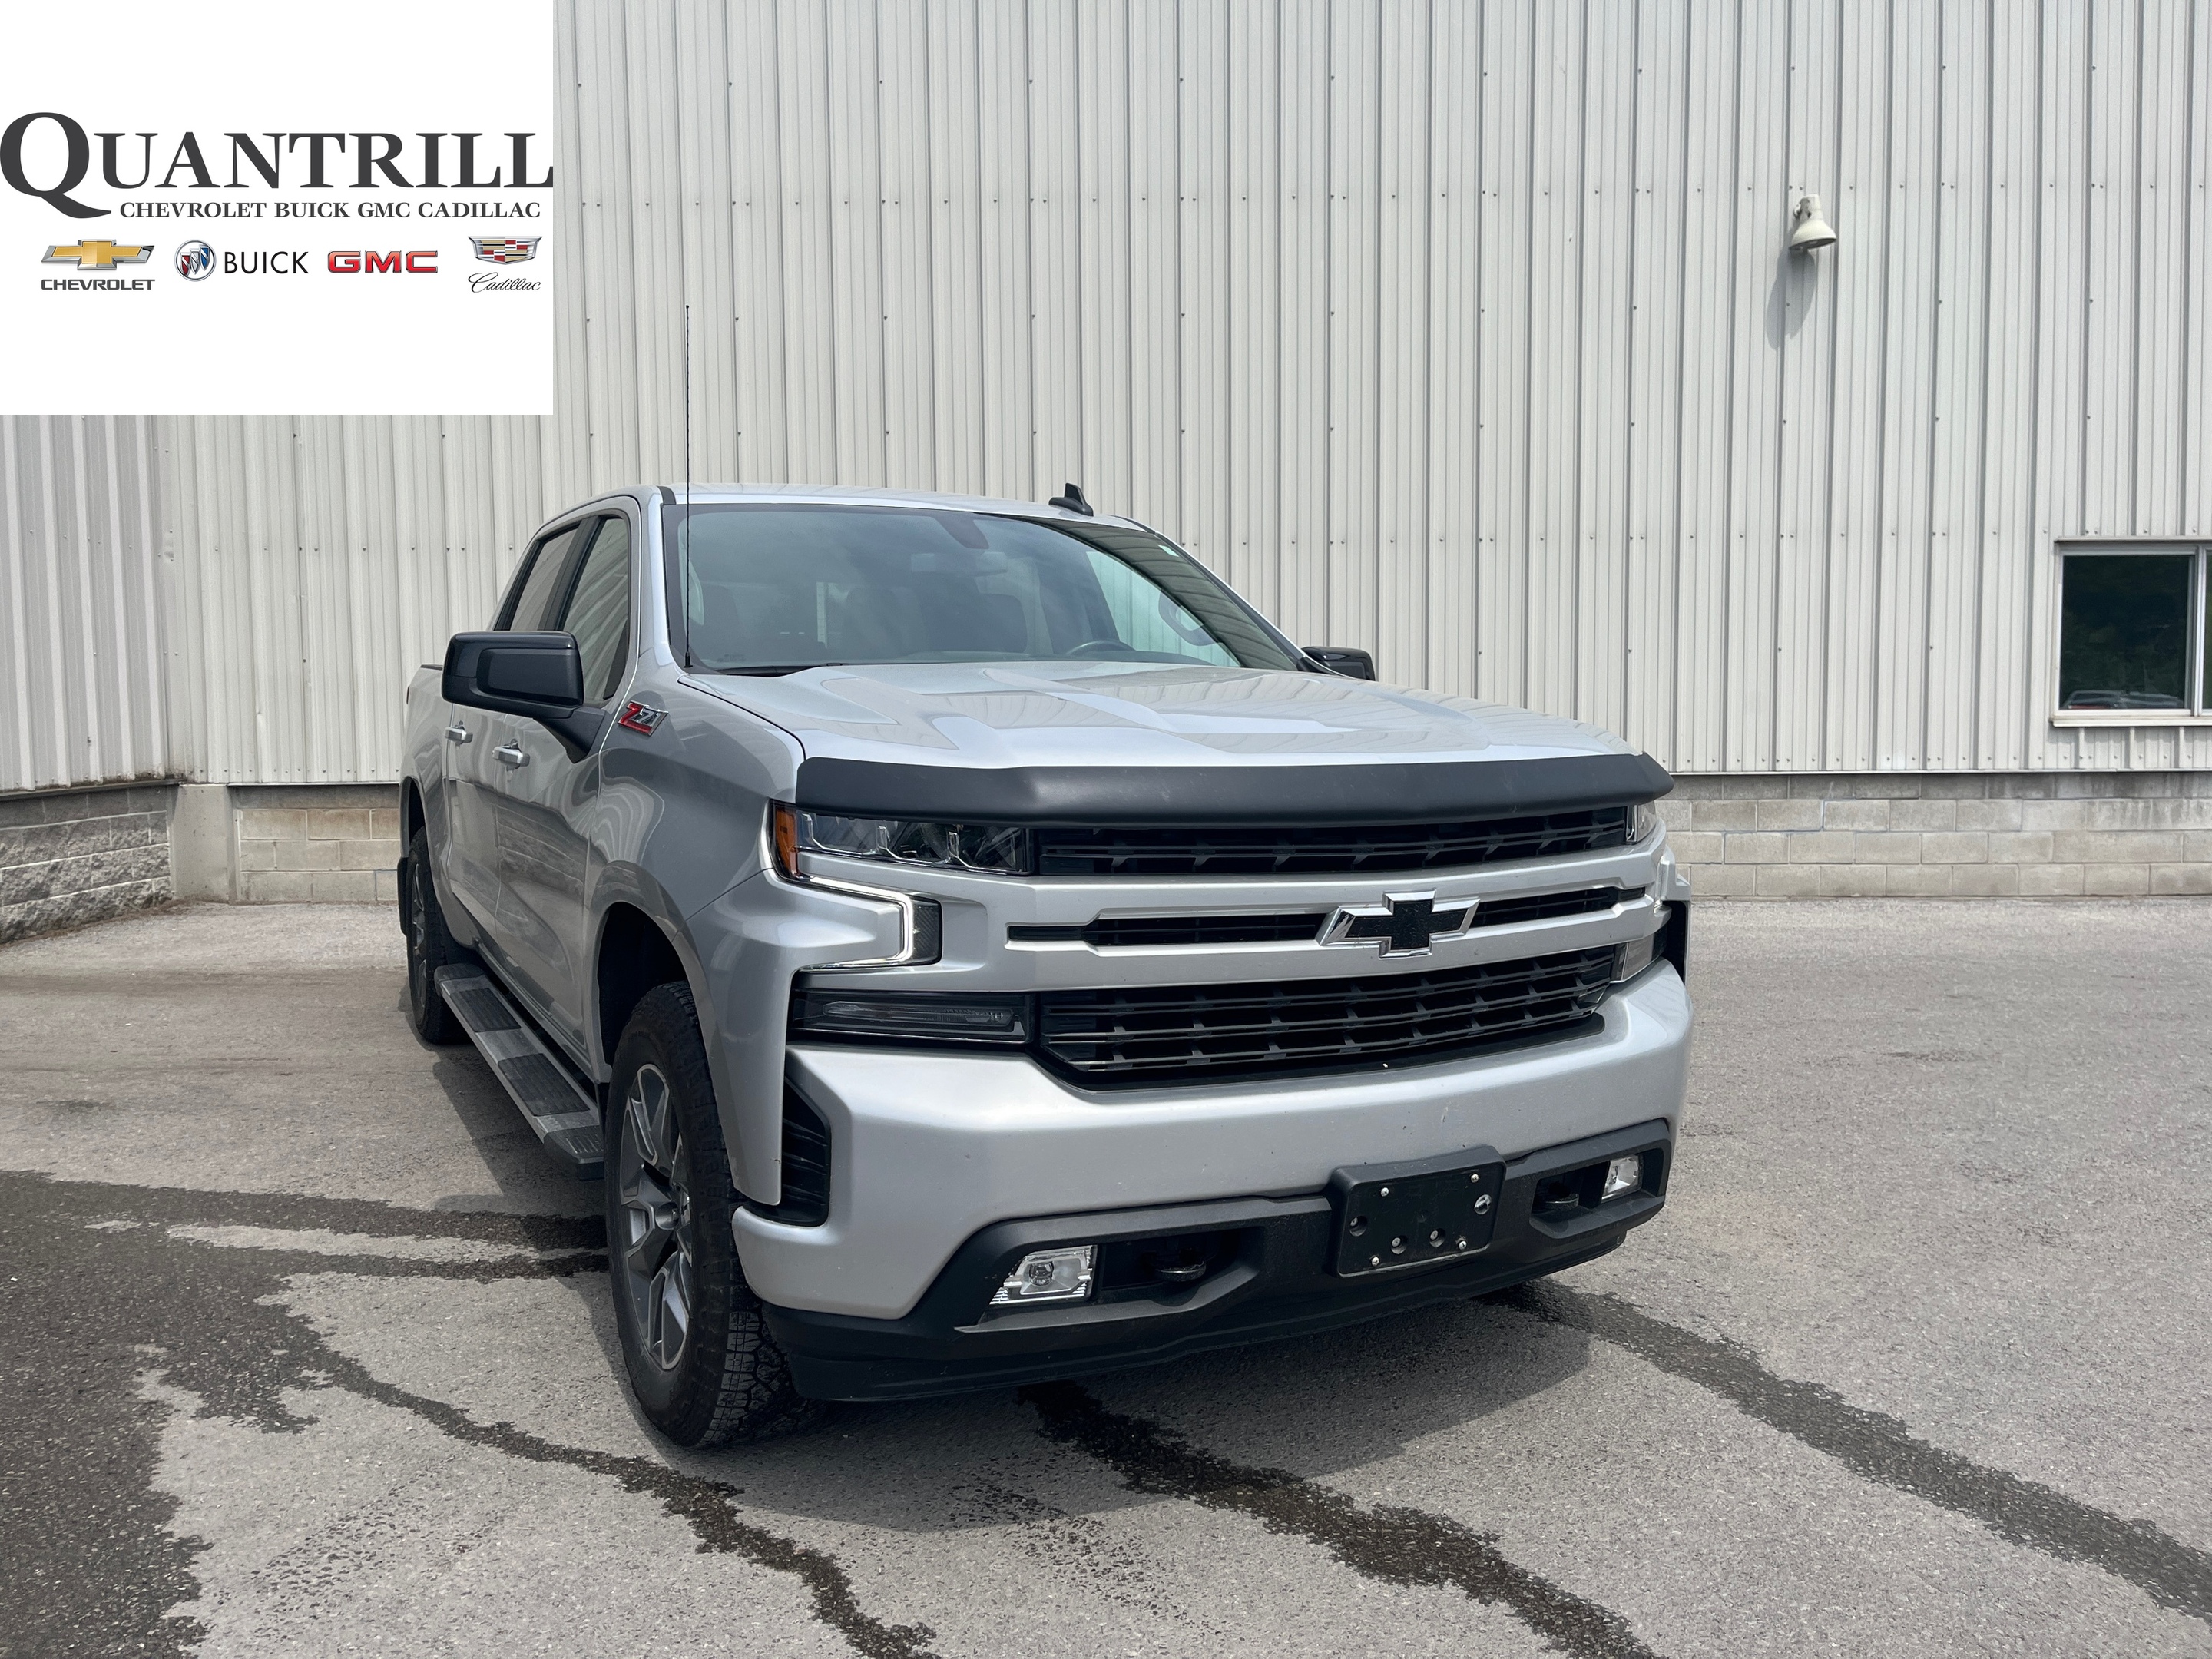 2021 Chevrolet Silverado 1500 RST + 5.3L + Bed Liner + Heated Seats + One Owner